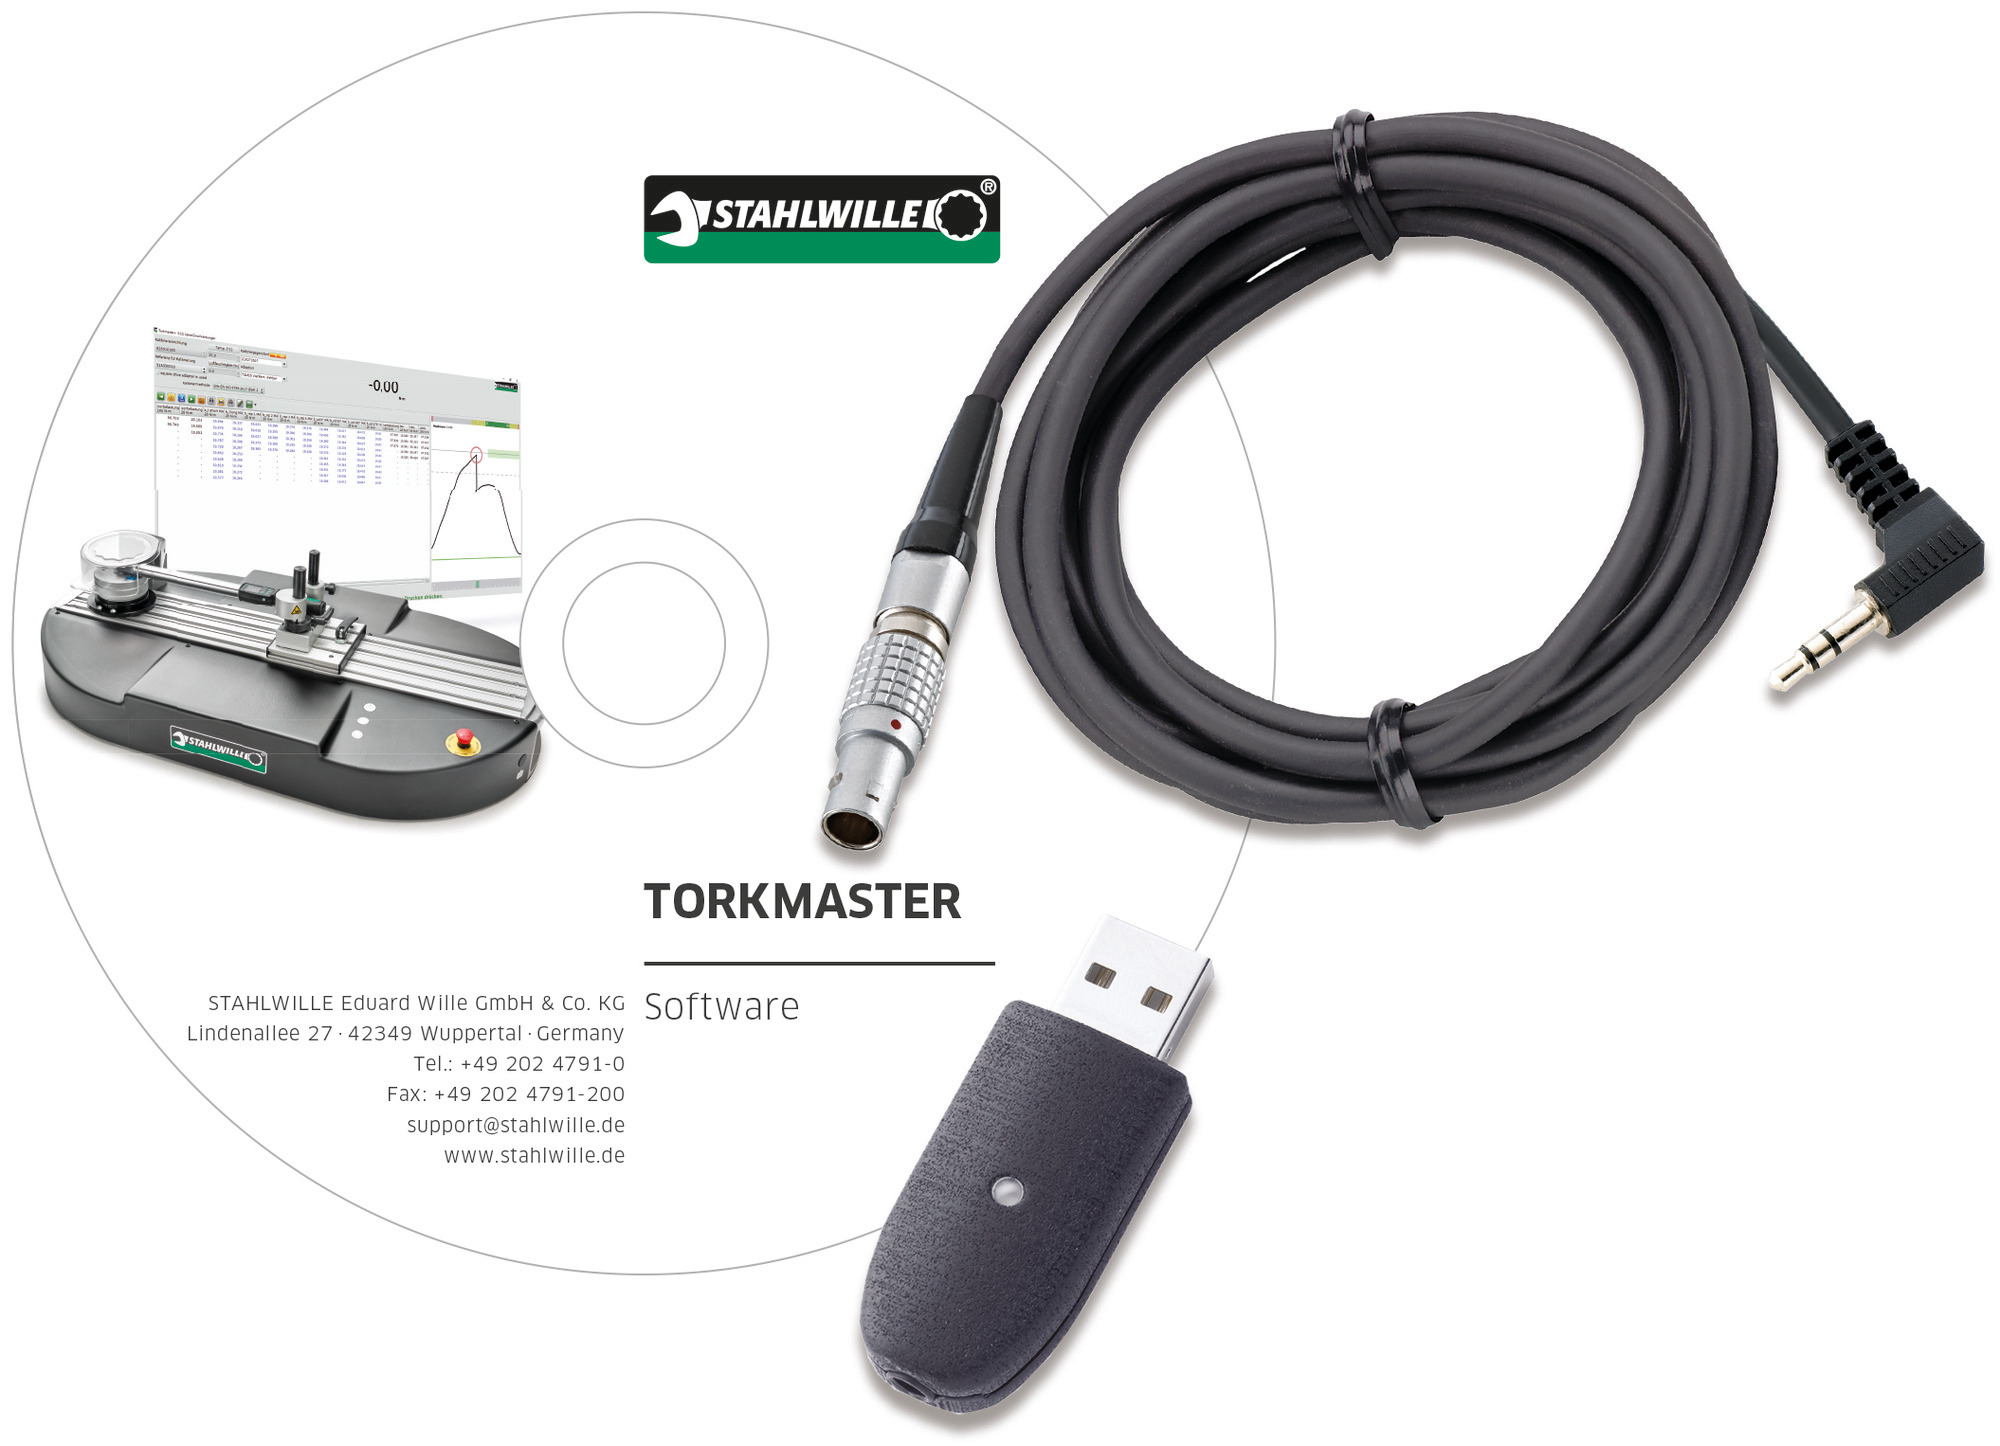 USB Adapter and Cable with Torkmaster Software 7759-6